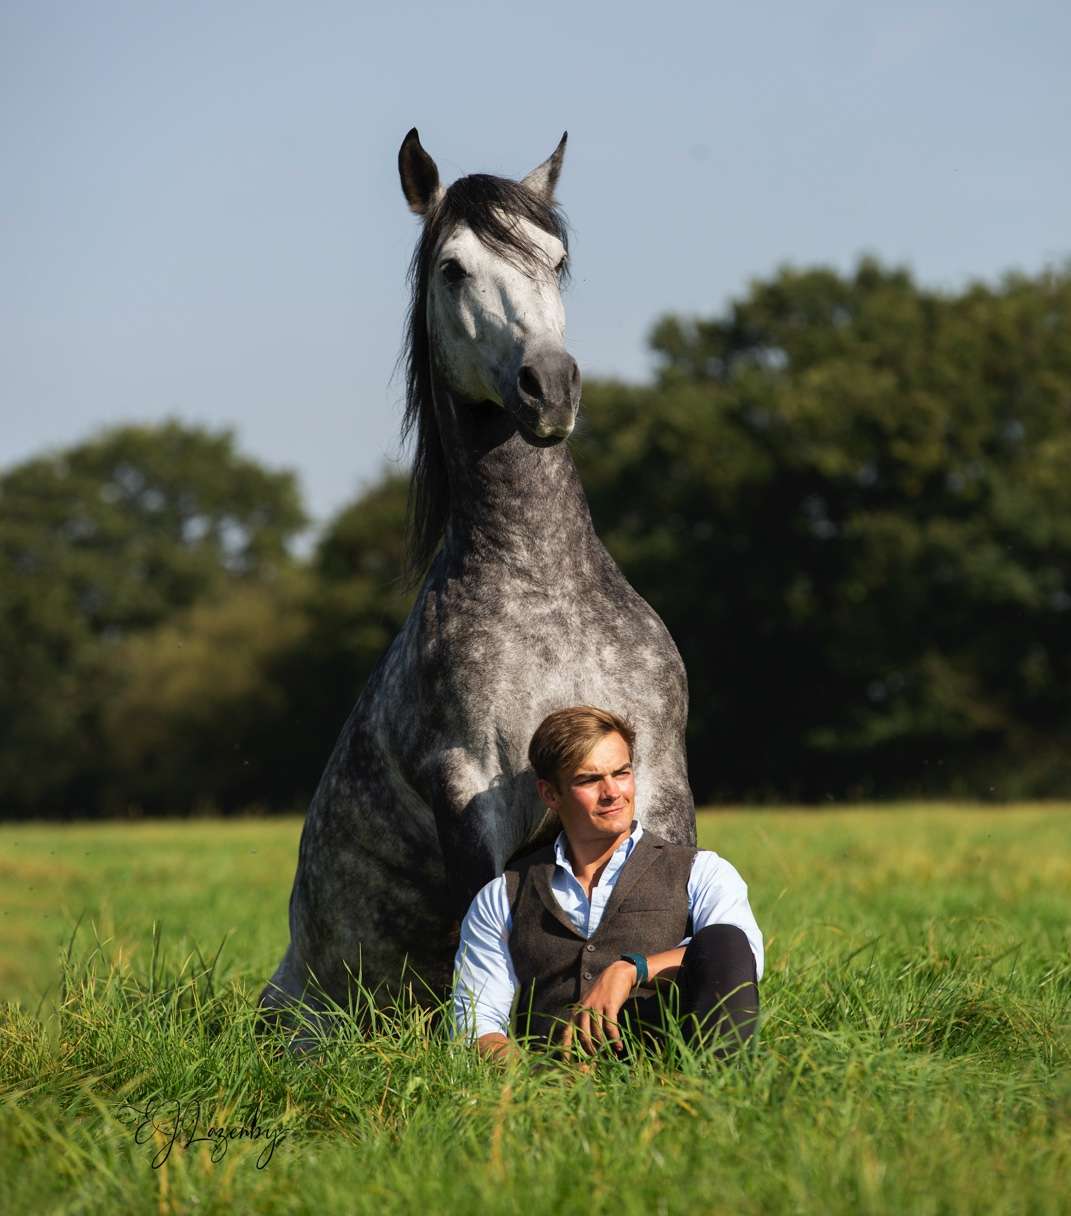 Ben Atkinson with a dapple grey horse sat together in the field